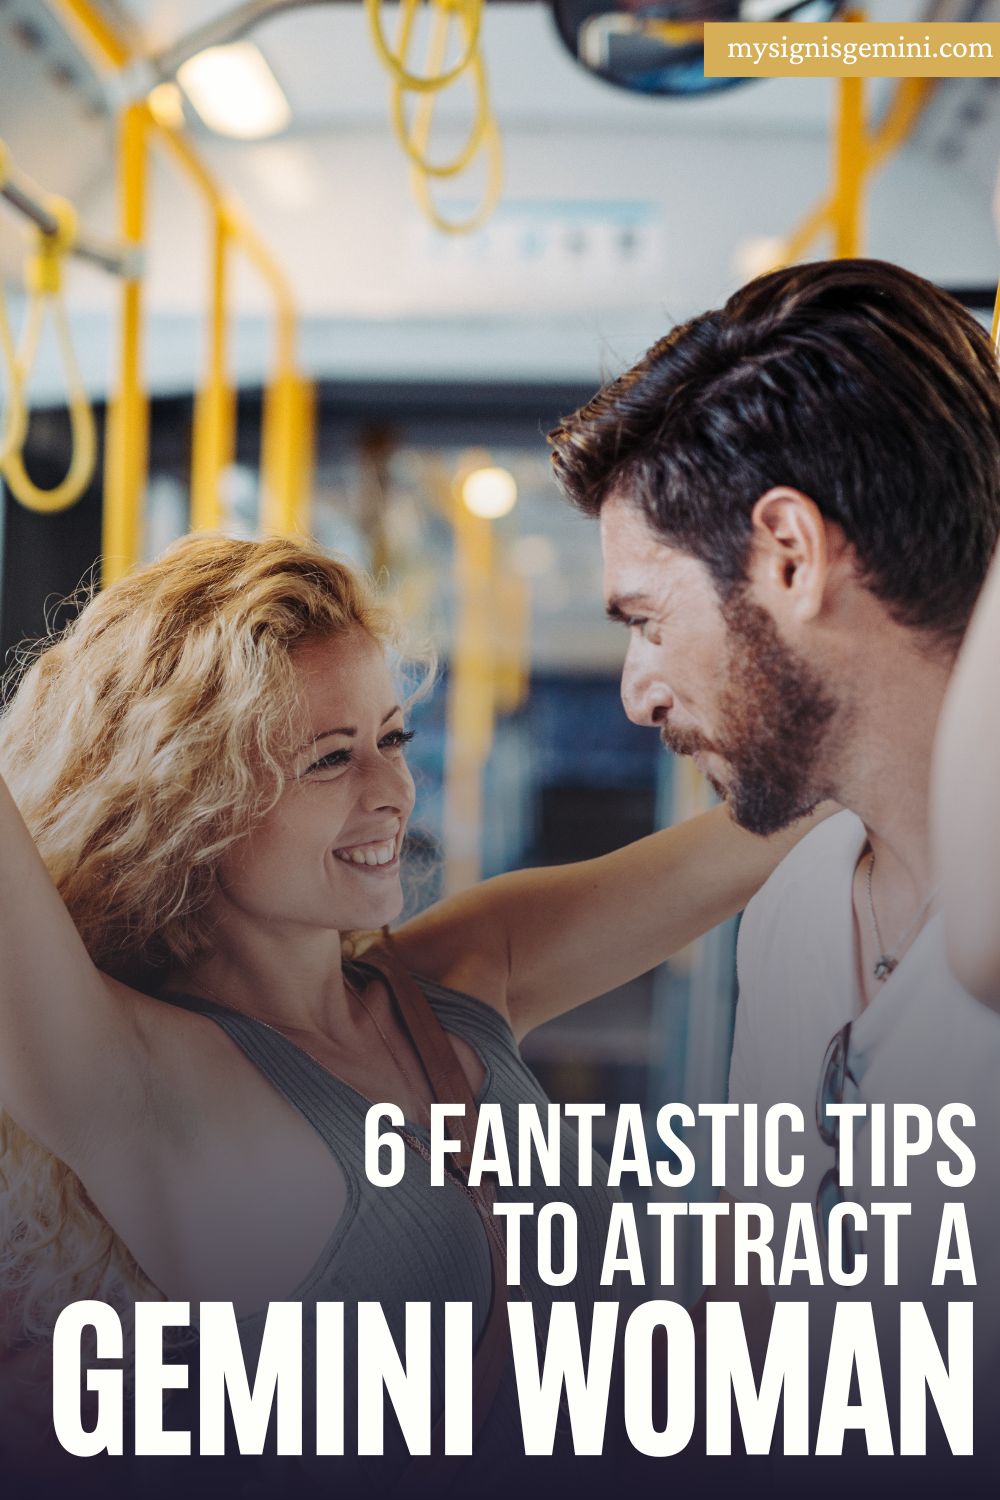 6 Fantastic Tips On How To Attract a Gemini Woman, Flirt with a gemini girl